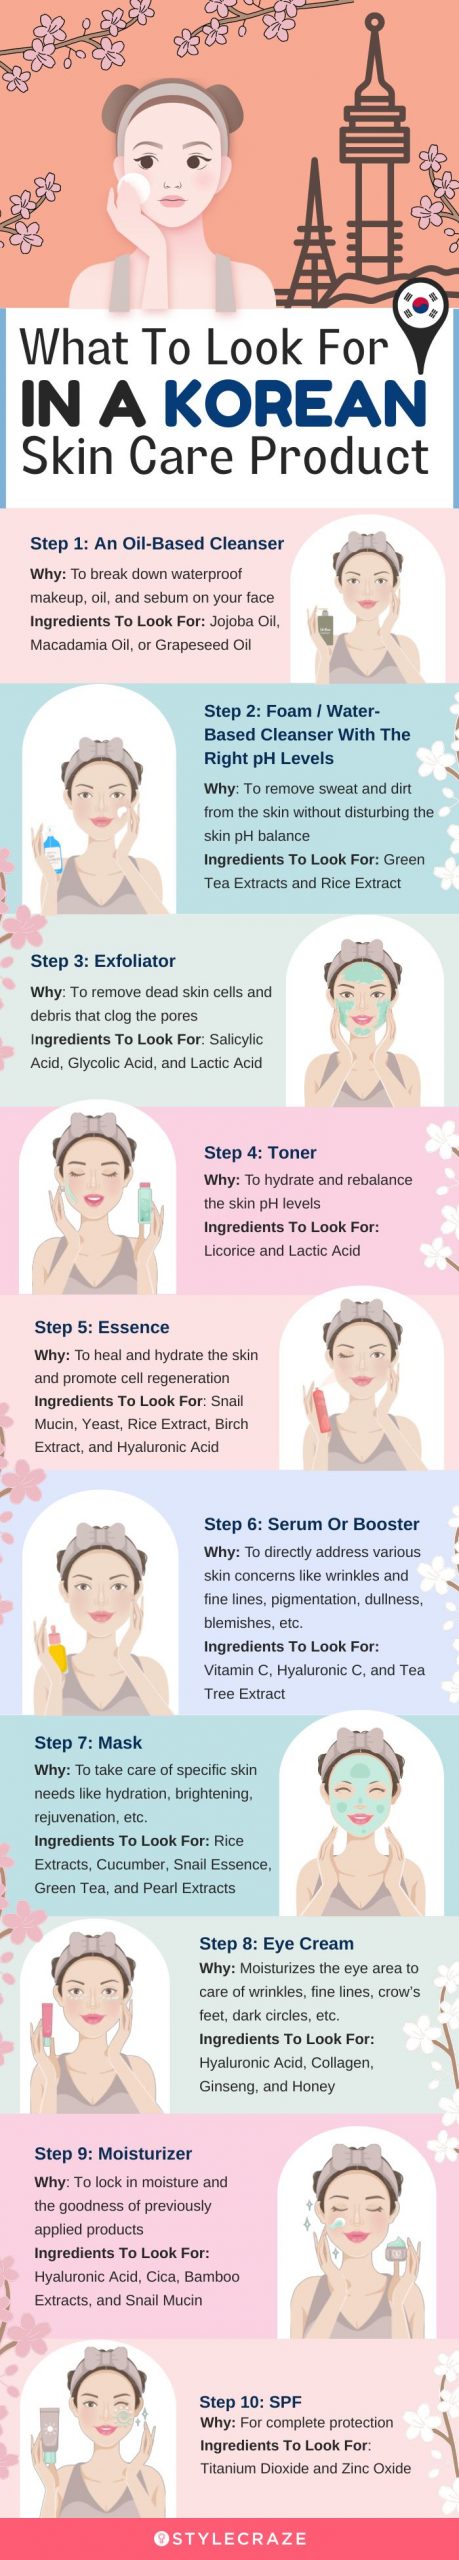 What To Look For In A Korean Skin Care Product (infographic)